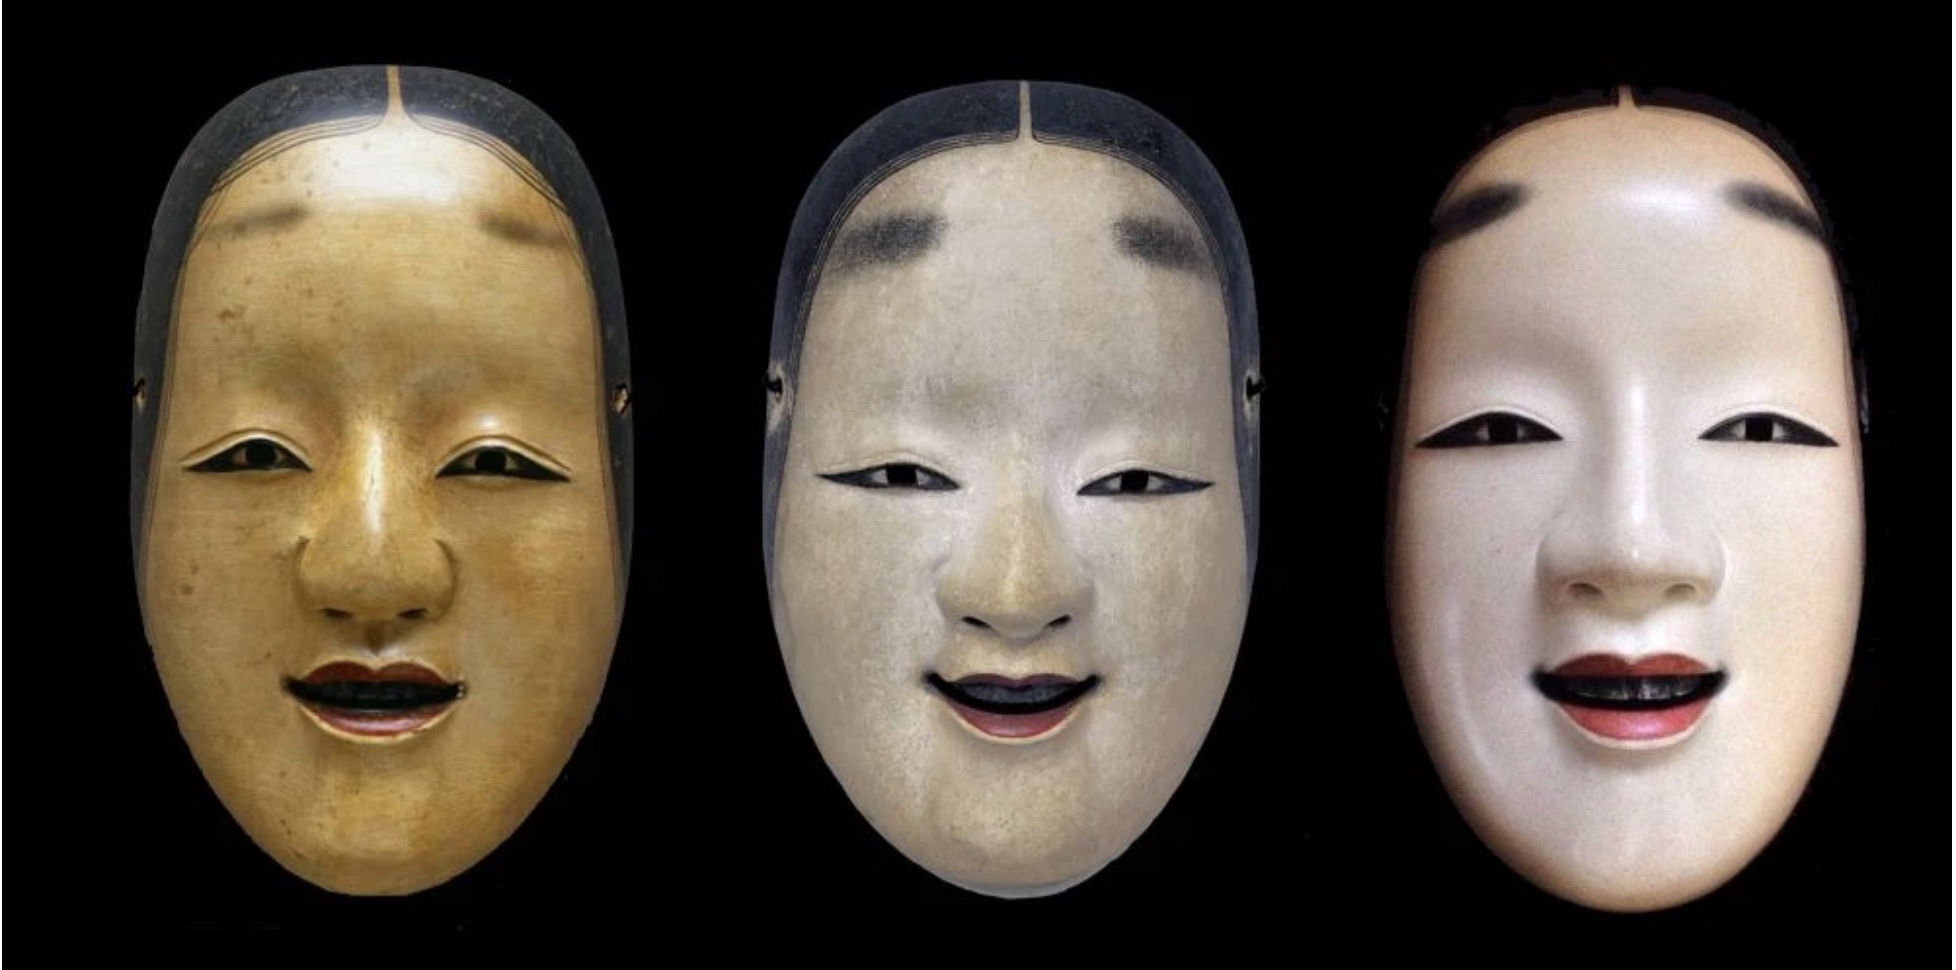 Onnamen are wooden masks of female faces, worn by men, which have been used since the 15th century in Japanese Noh theater. Credit: Japanese Clothing